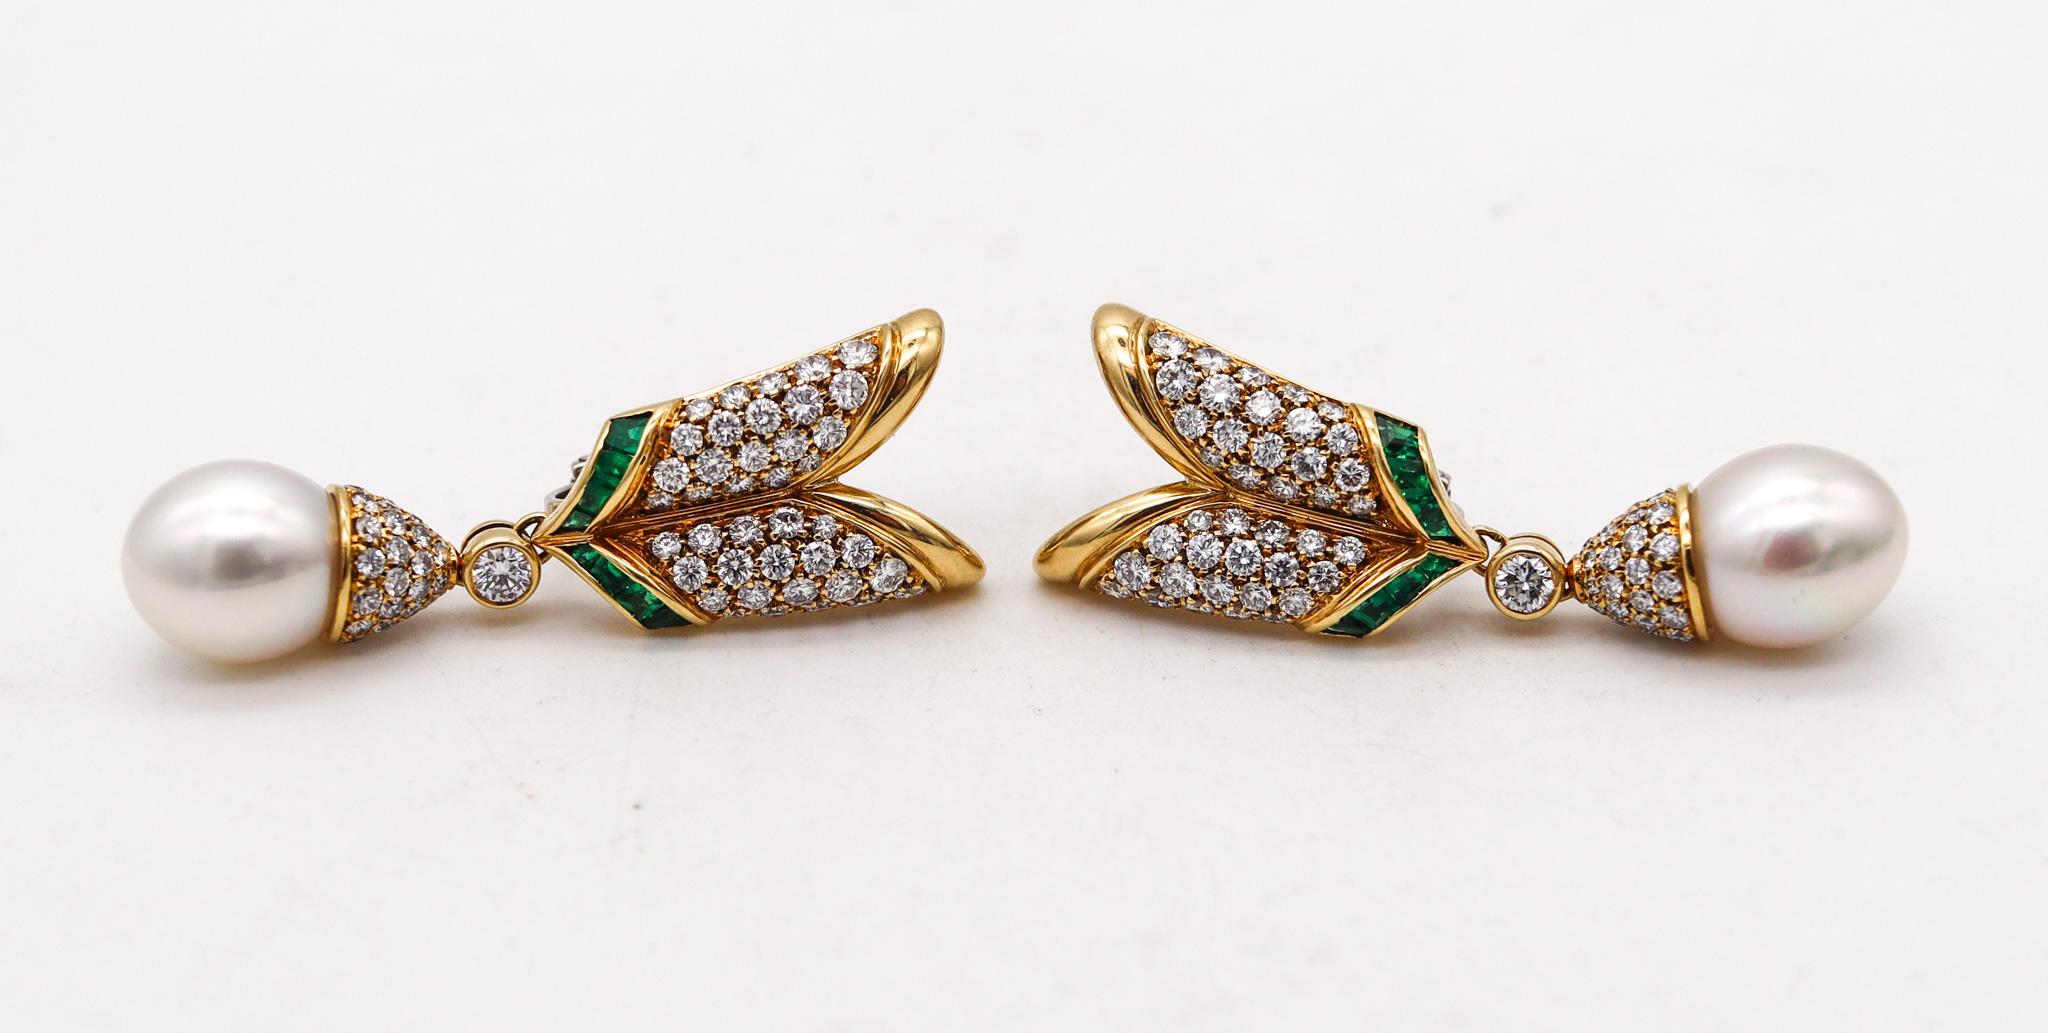 Modern Picchiotti Dangle Drop Pearls Earrings 18Kt Gold 4.07 Ctw Diamonds And Emeralds For Sale